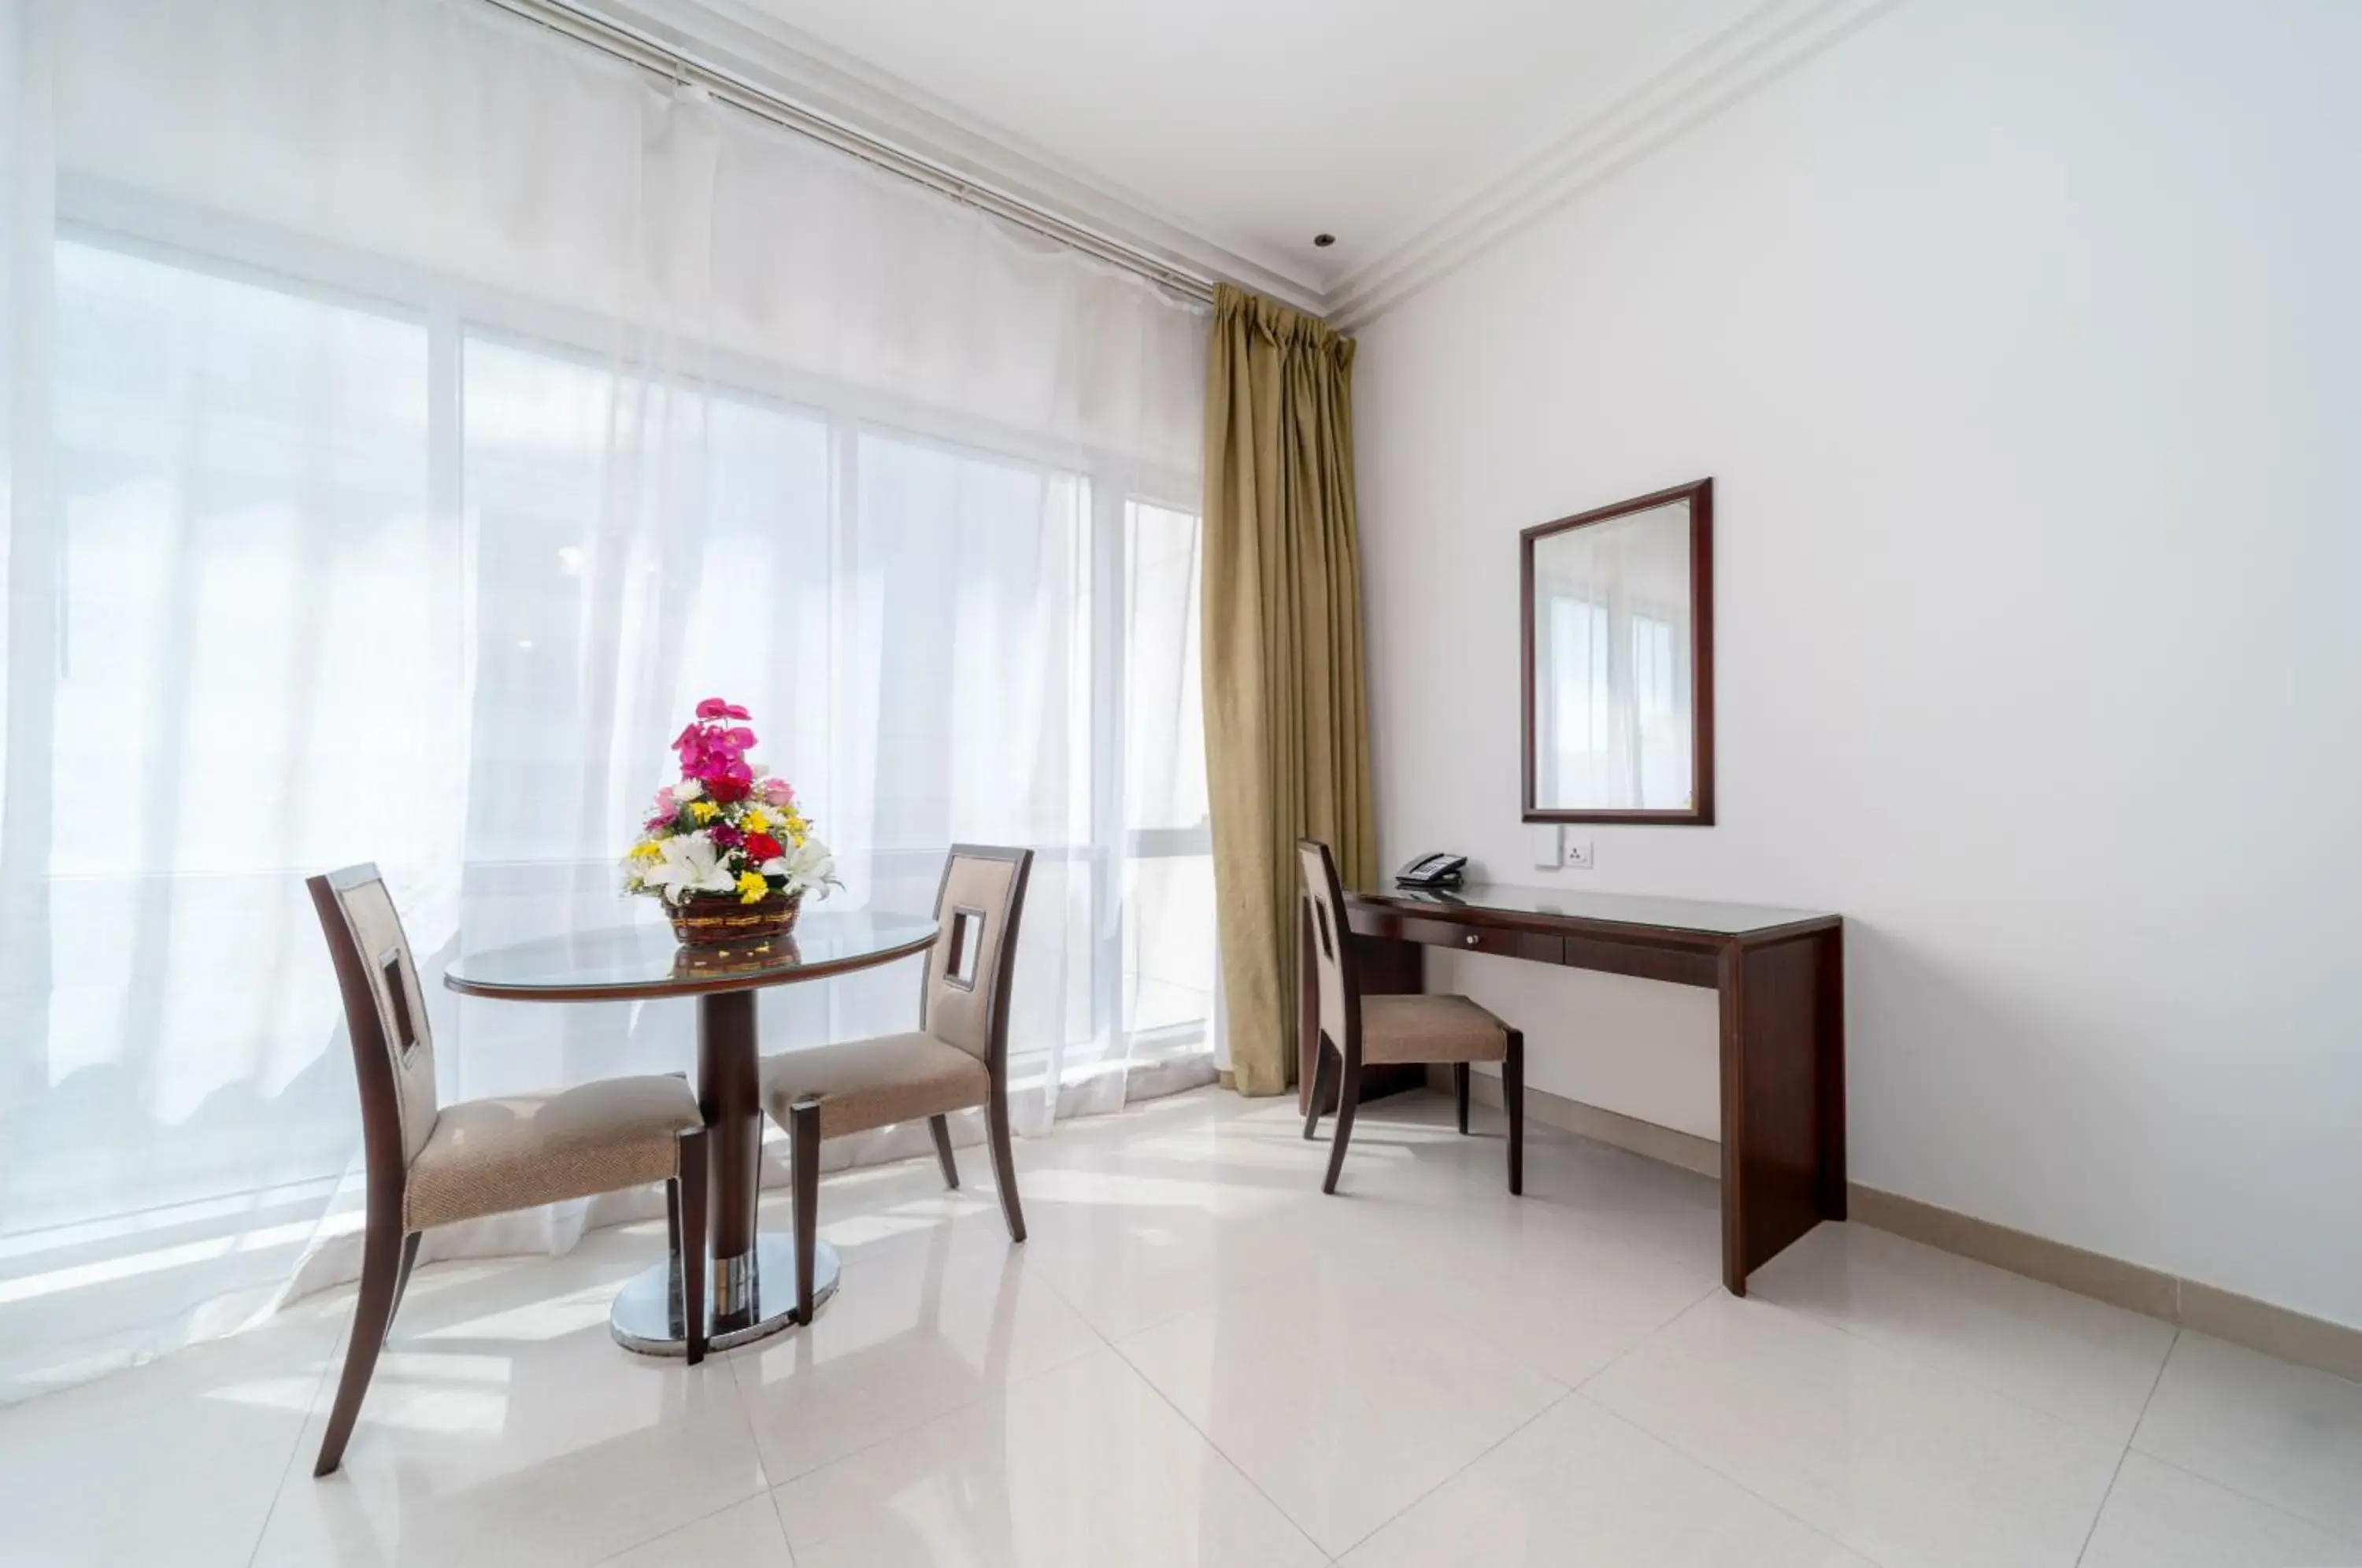 Seating area, Dining Area in Star Metro Deira Hotel Apartments